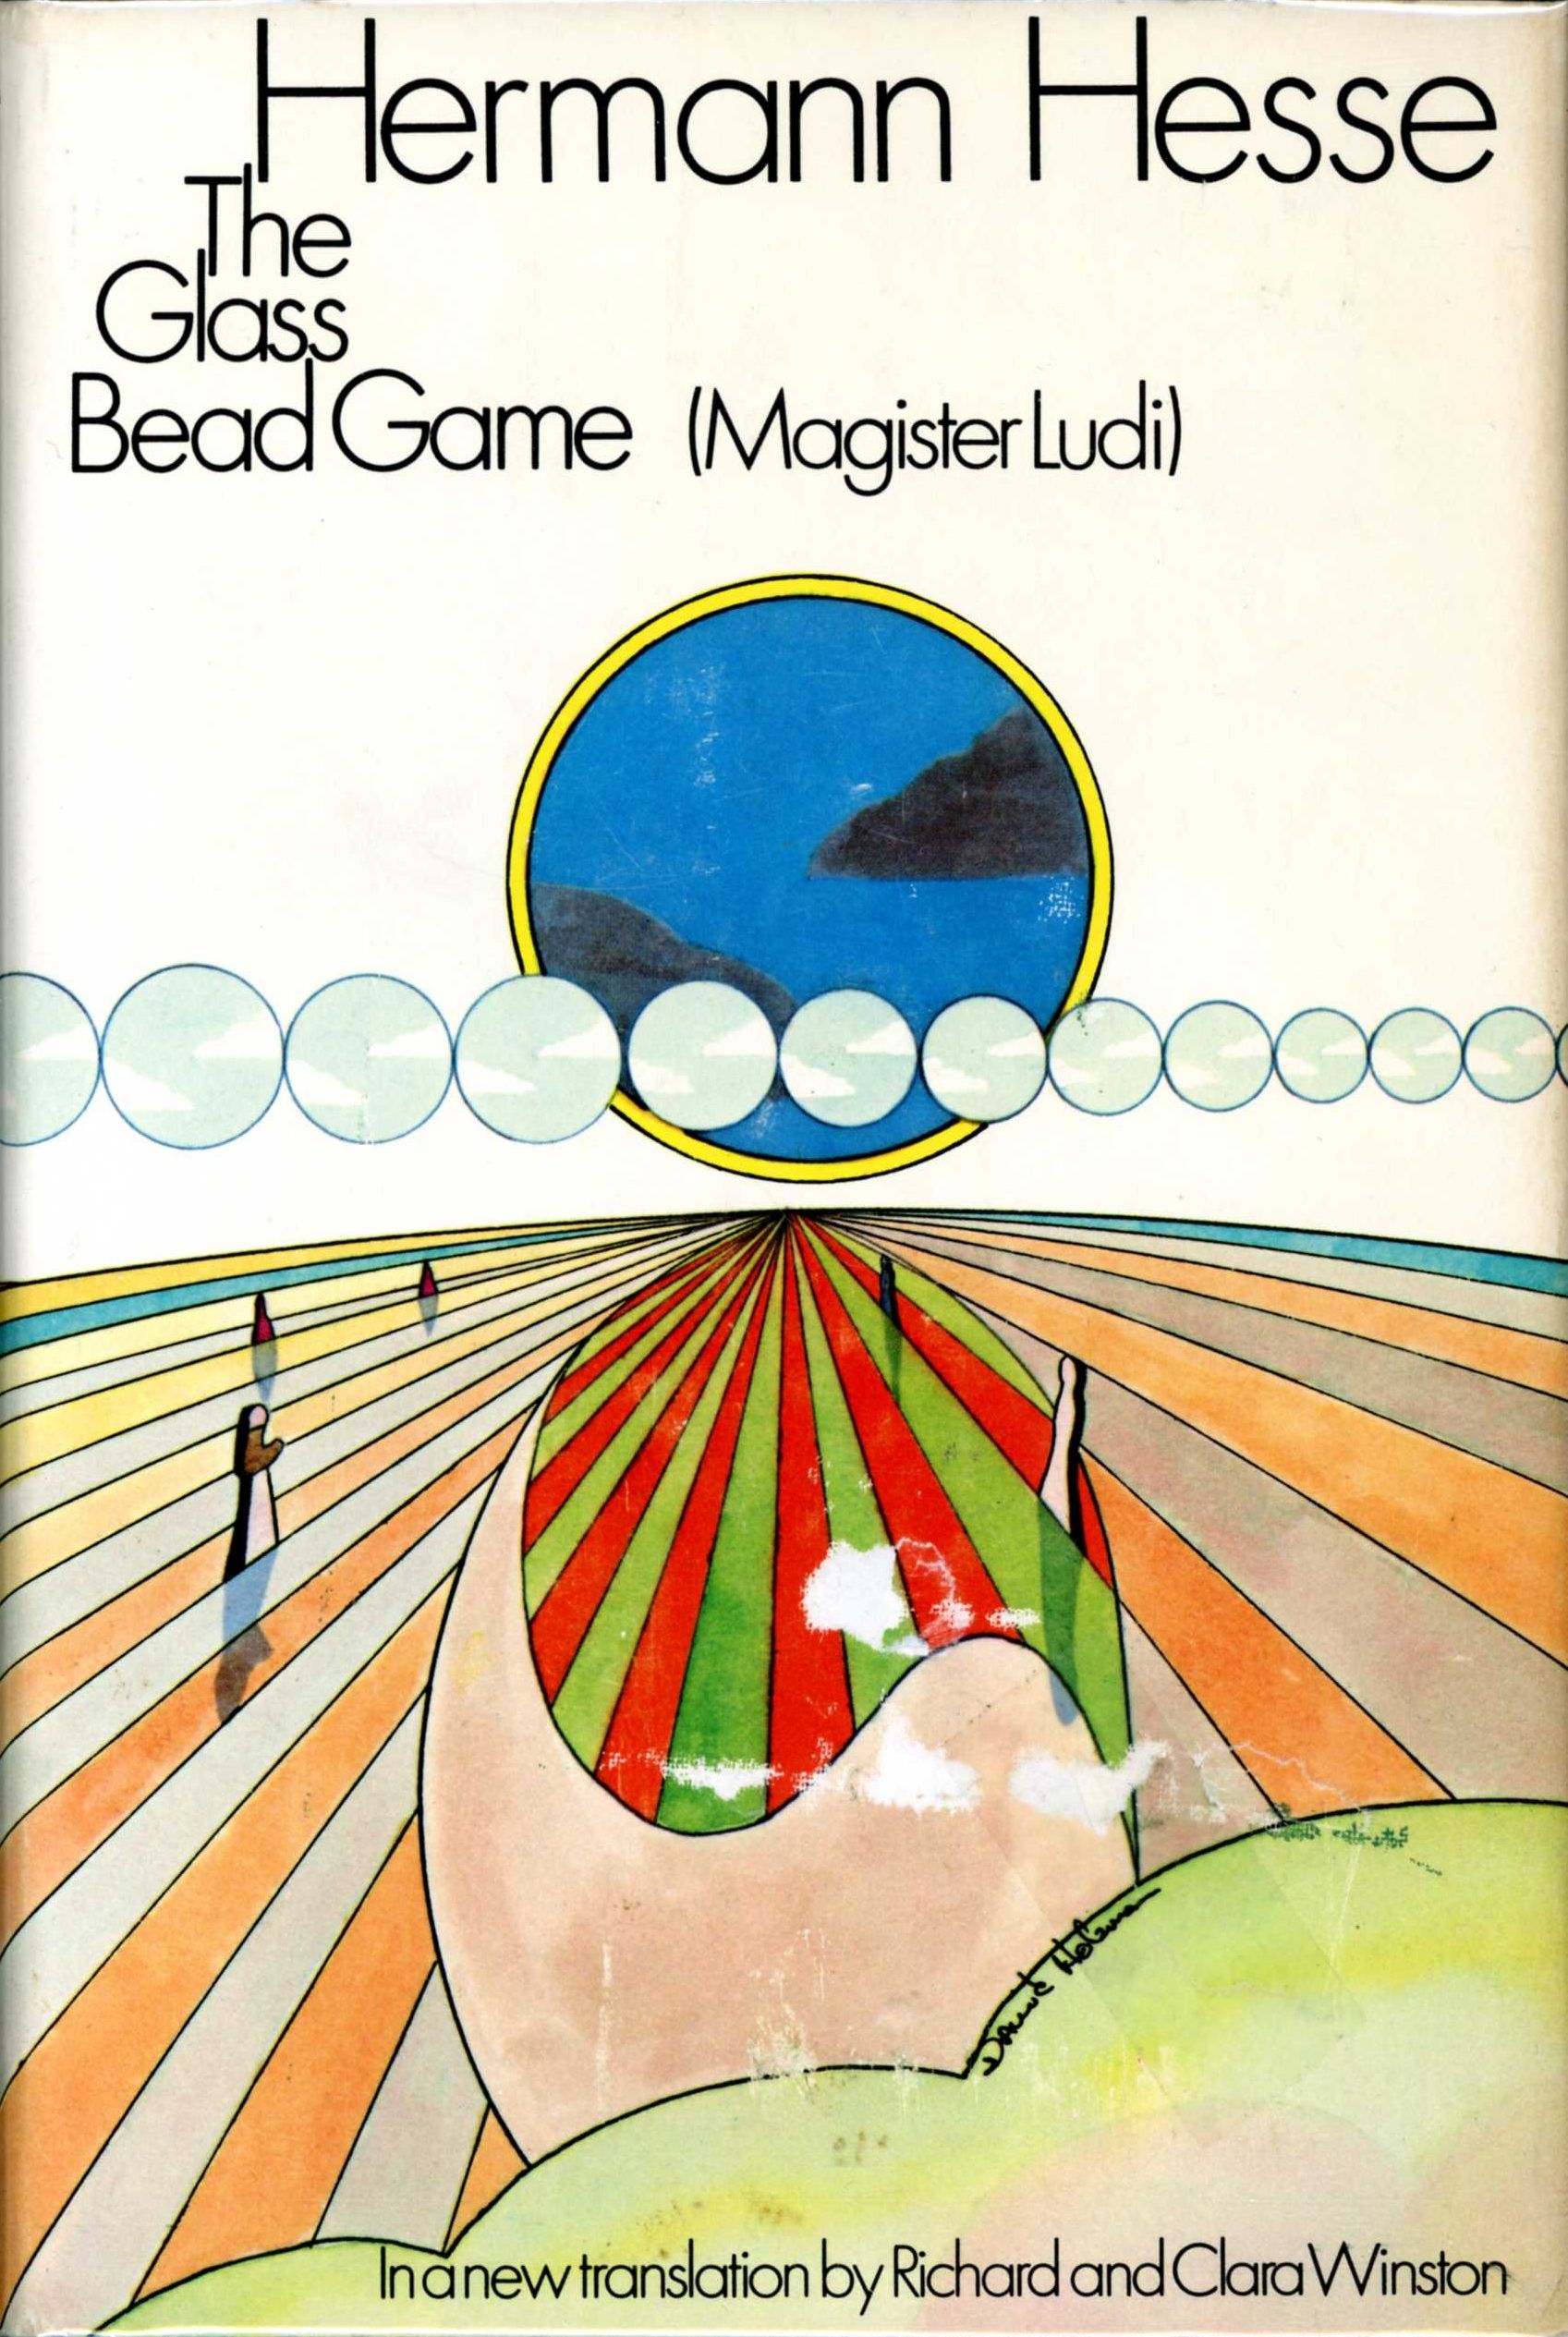 Higher Education: Hermann Hesse’s The Glass Bead Game